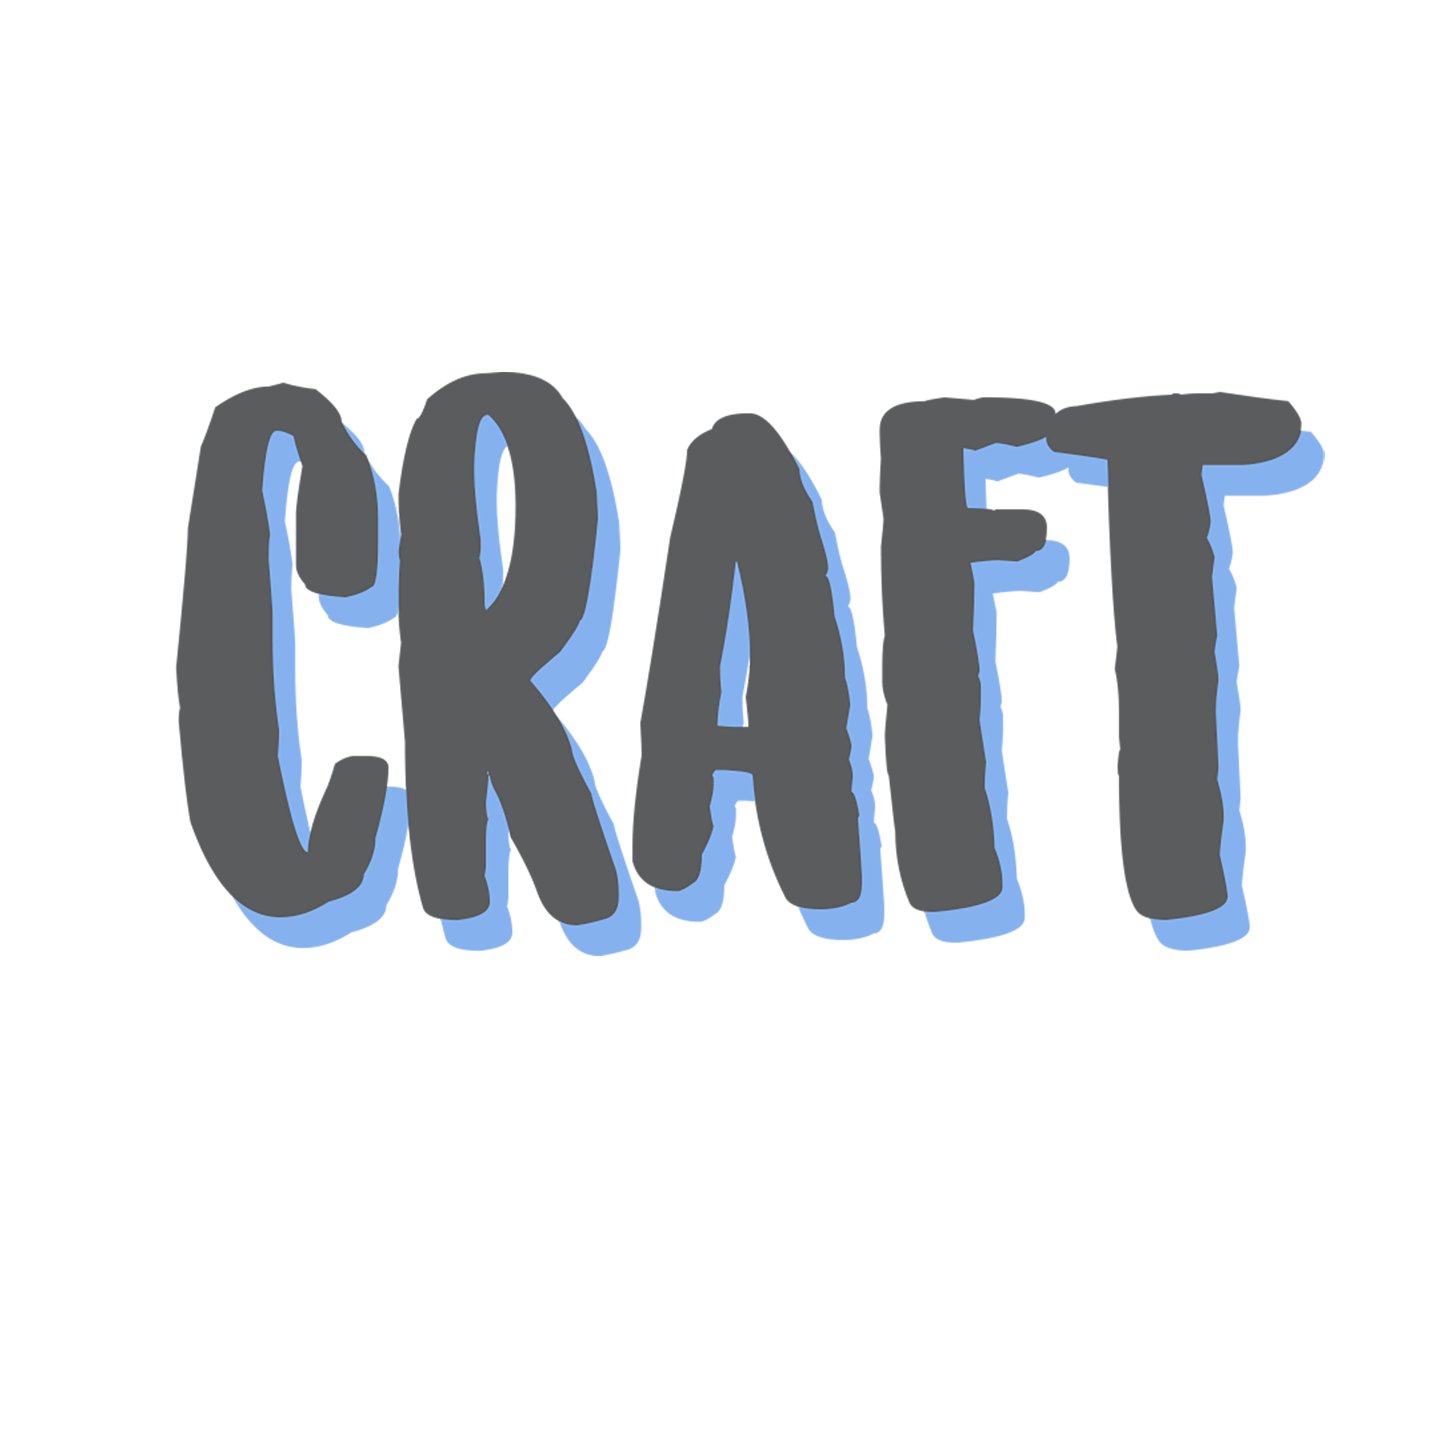 Craft is a web series that follows the team of a local brewery and their day to day struggles with Old Vs. New.